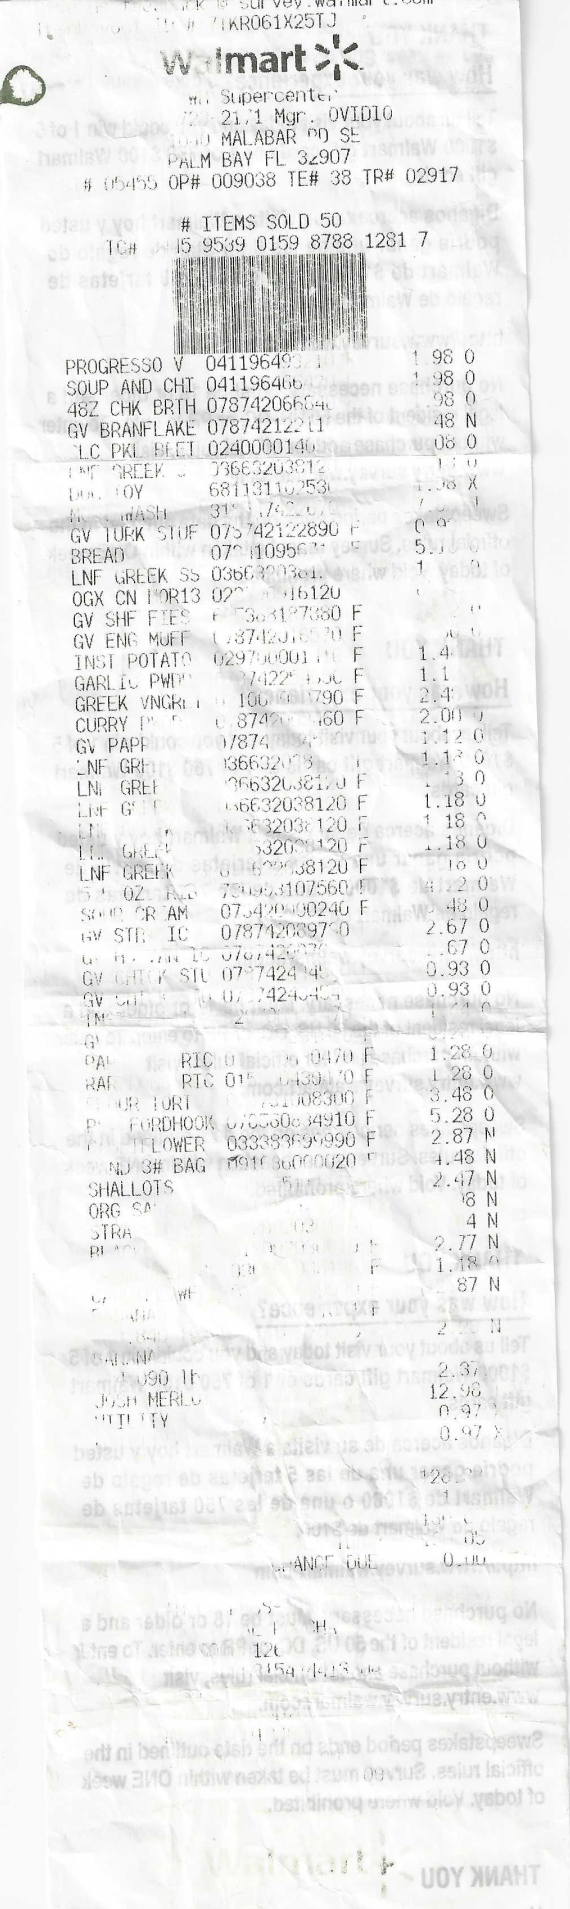 Totally illegible obscure receipt Malabar store